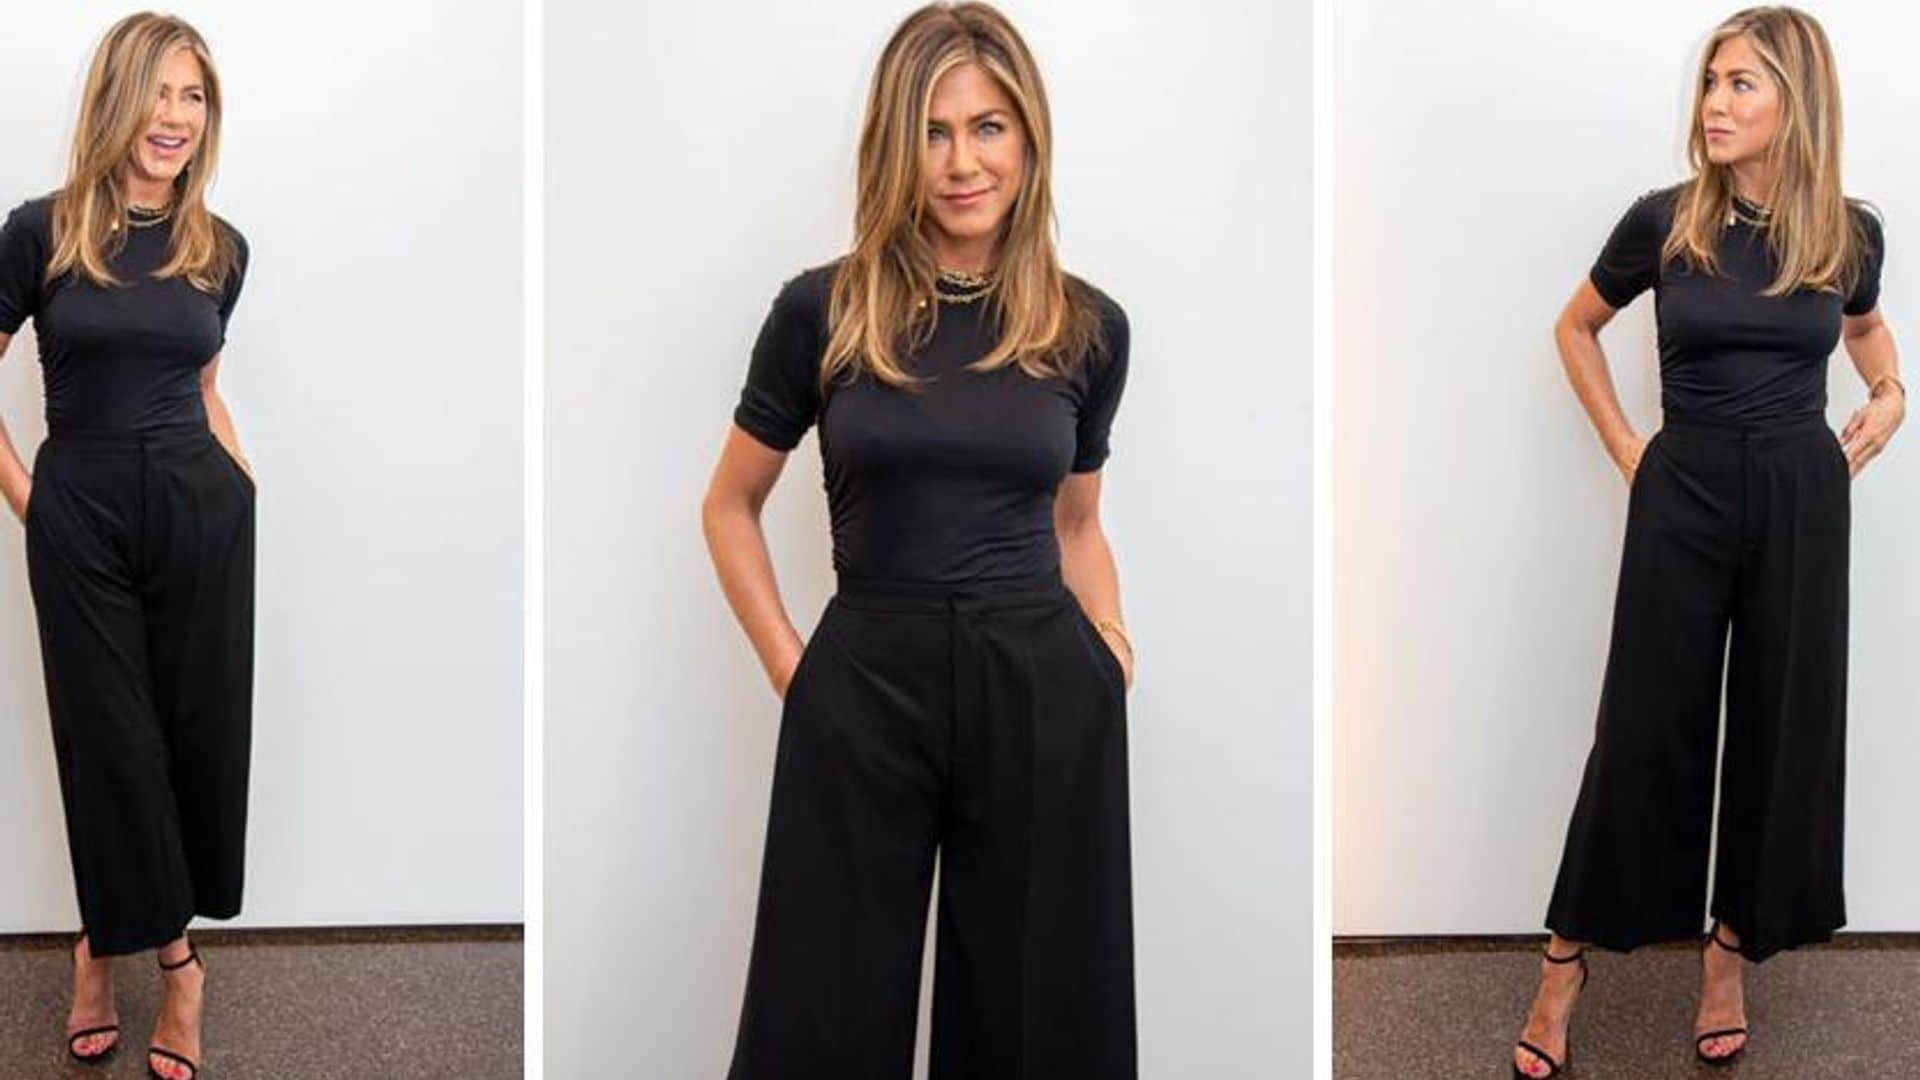 For $120, you can achieve Jennifer Aniston´s comfortable, smart and stylish look